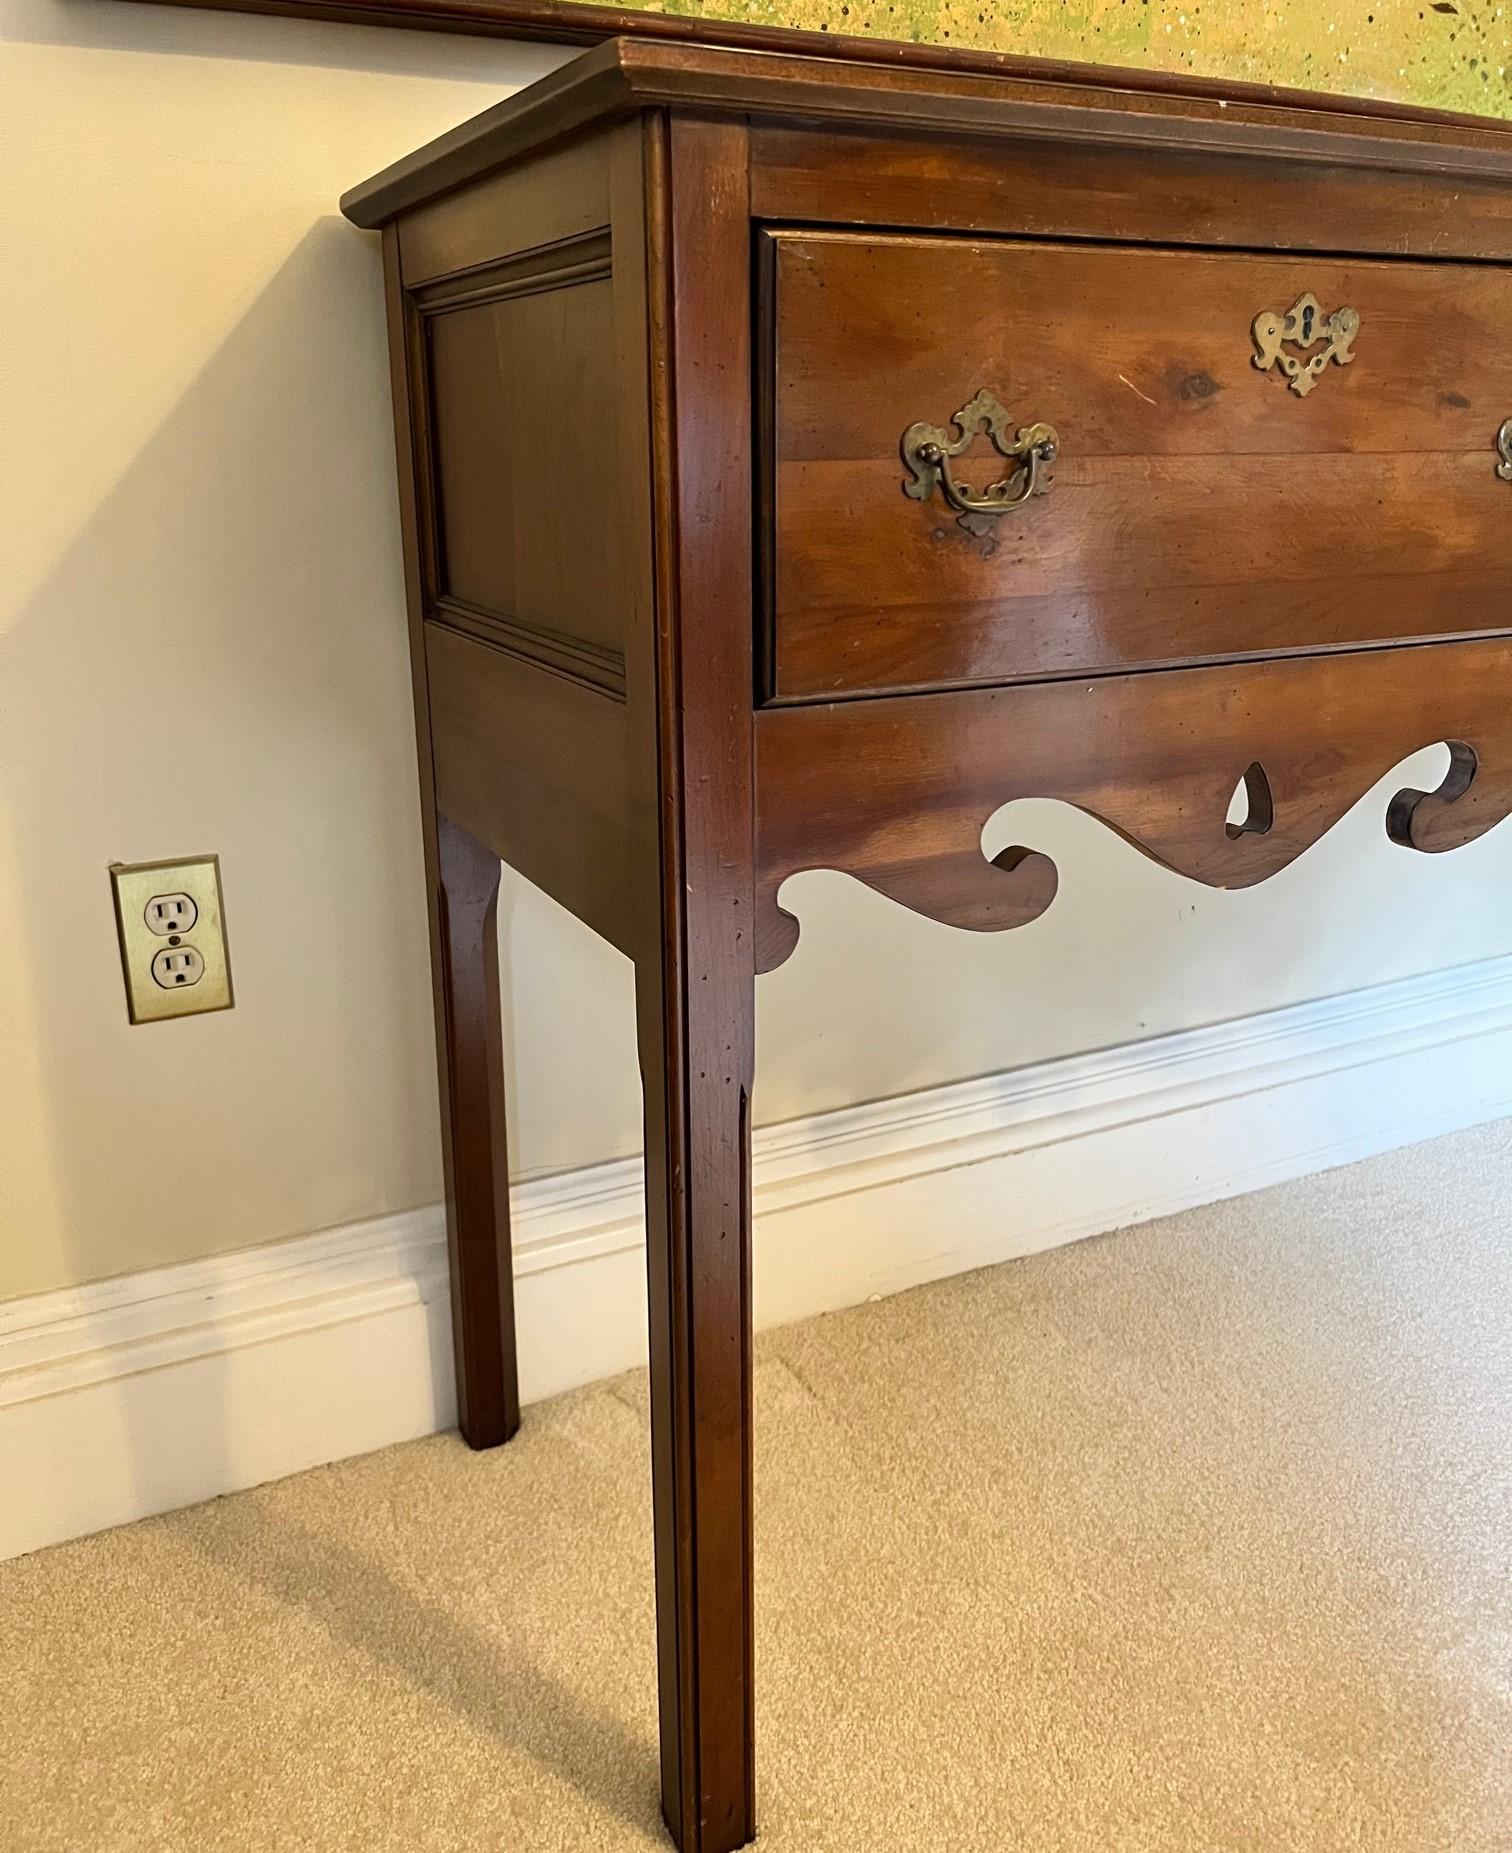 Vintage Wright Table Company George III-style Yew wood two drawer sideboard credenza with brass drawer pulls and escutcheons.  A lovely wooden furniture piece with charming details including carved elements below the drawers and on the 2